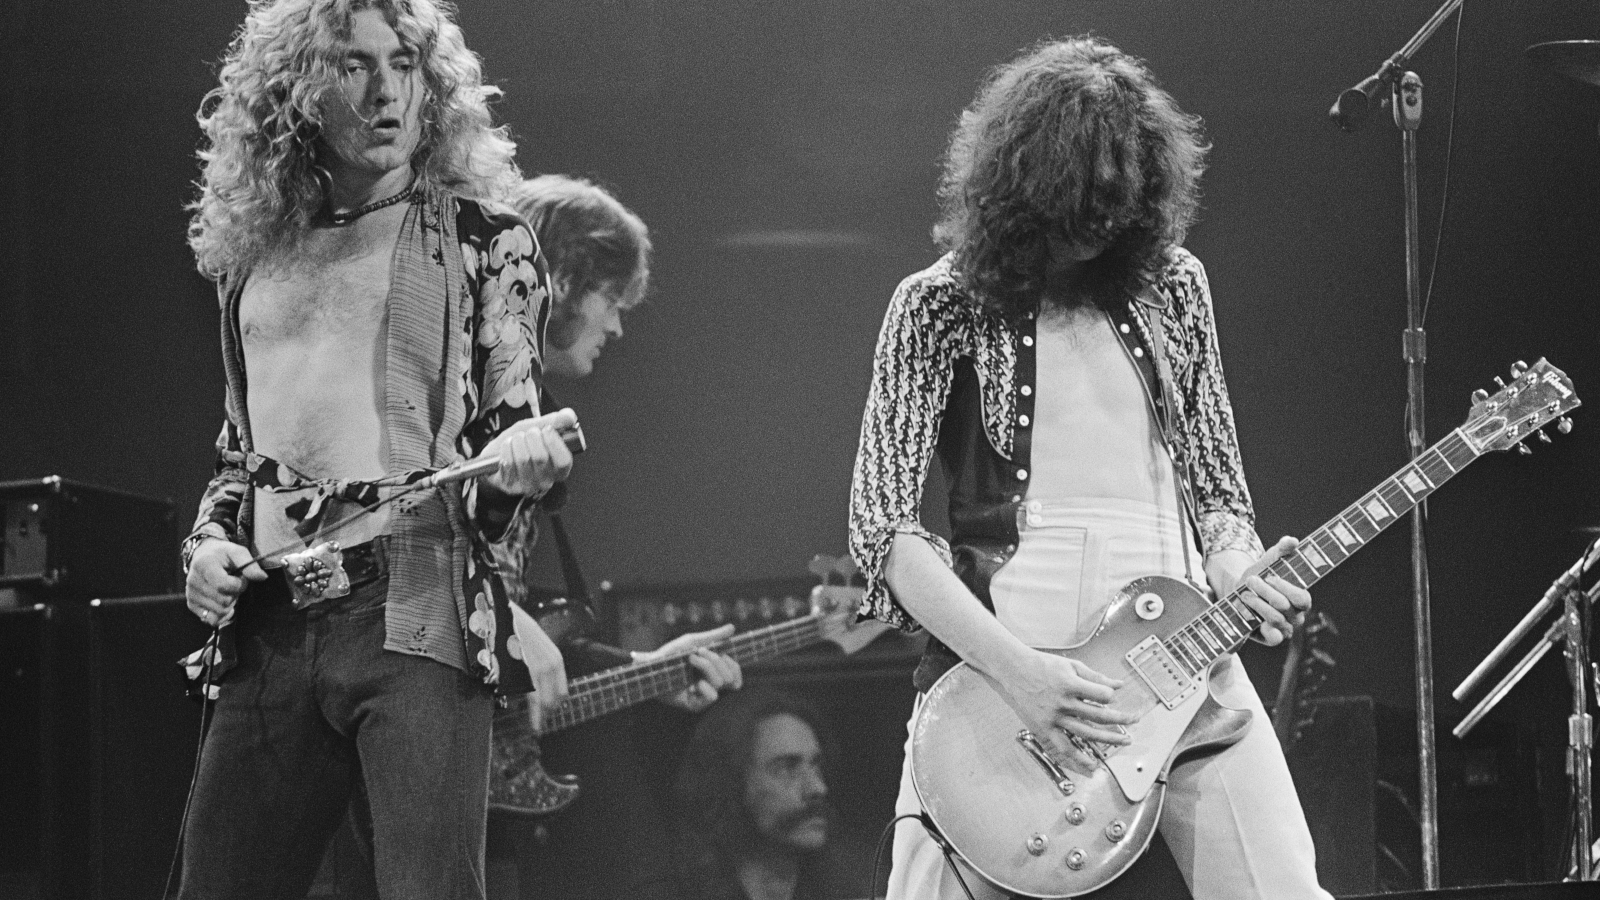 I Owe It to All of Them”: Jimmy Page Explains How His Love of the Blues Fueled the Fire for One of Rock's Biggest Bands GuitarPlayer